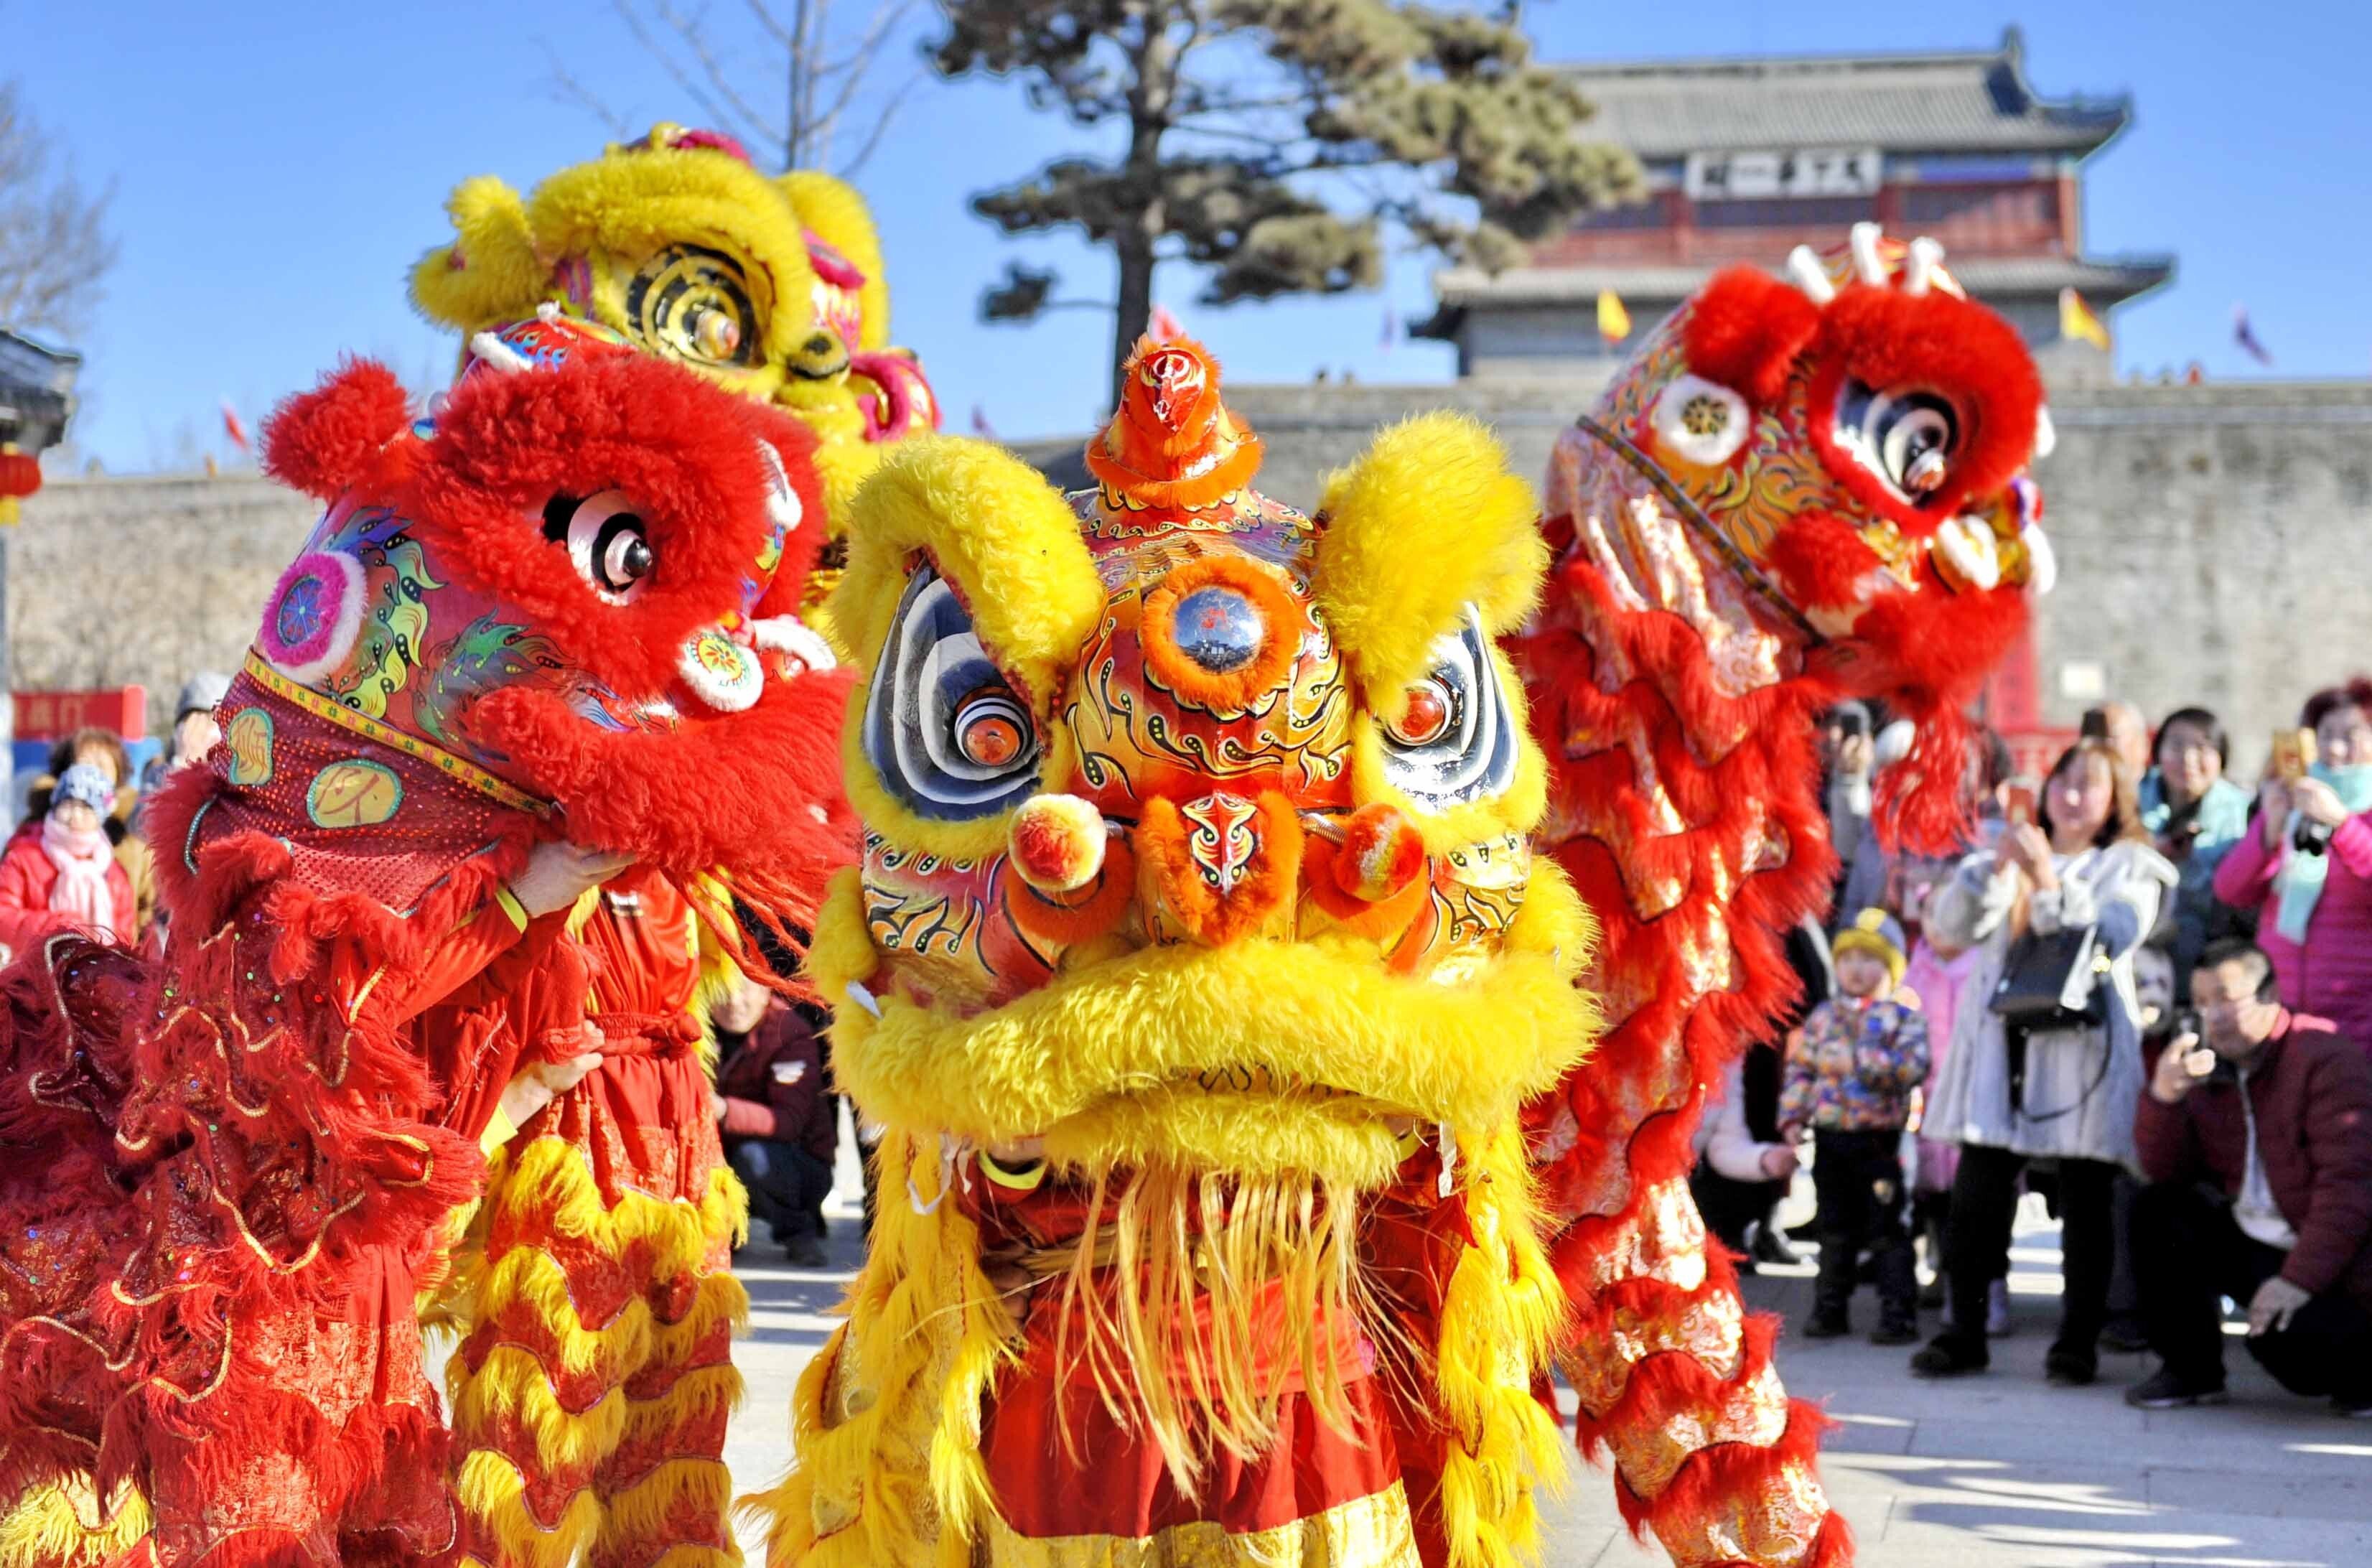 In addition to mooncakes and lanterns, the Moon Festival in Vietnam also features the lion dance